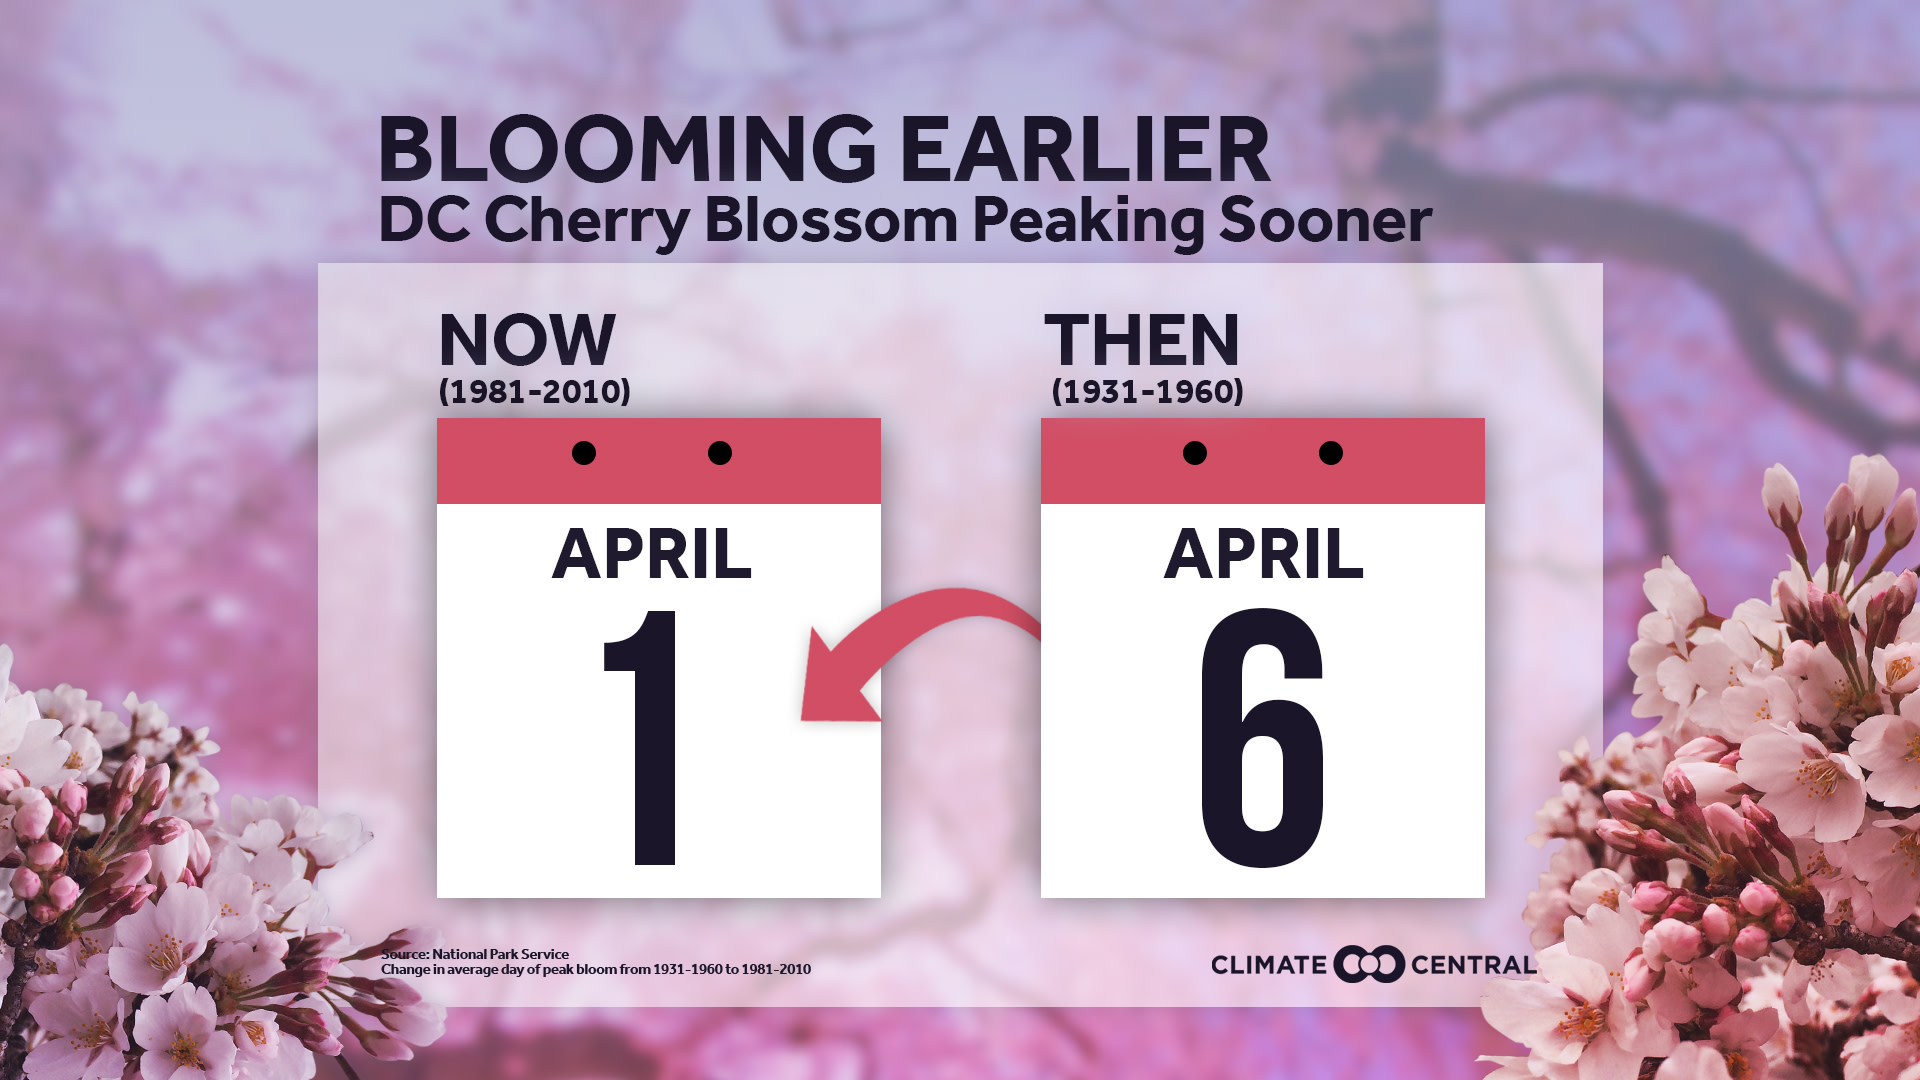 Set 1 - Cherry Blossoms Coming Earlier